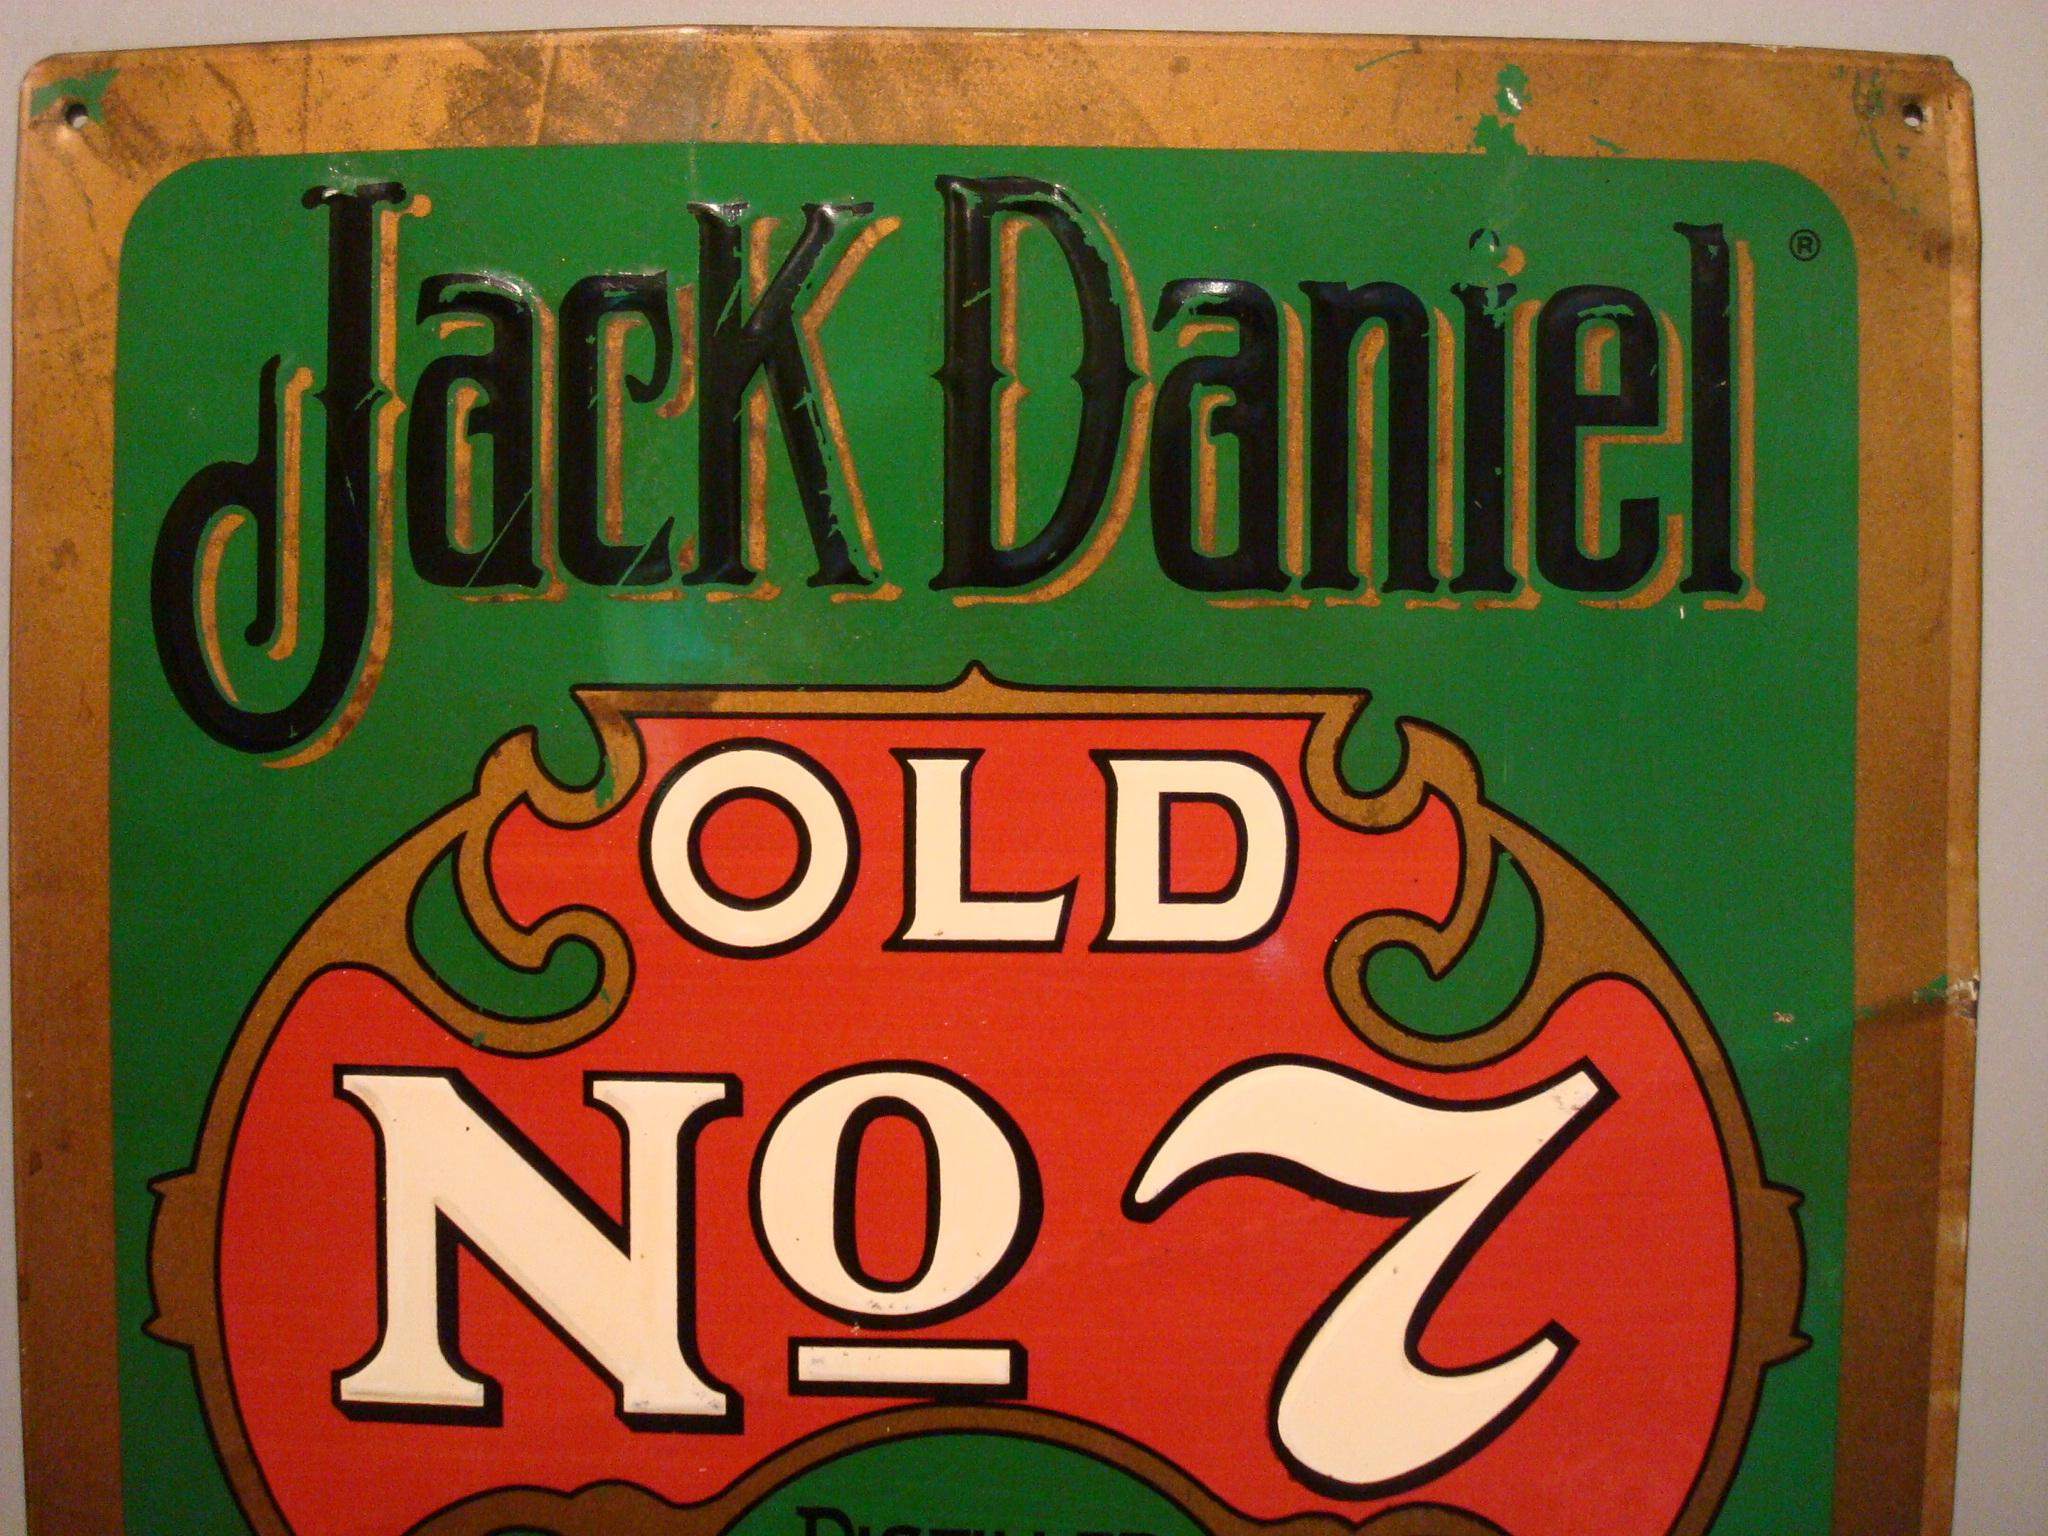 Jack Daniels old number 7 whiskey tin advertising bar sign / 1950s midcentury.
Perfect to decorate a bar.